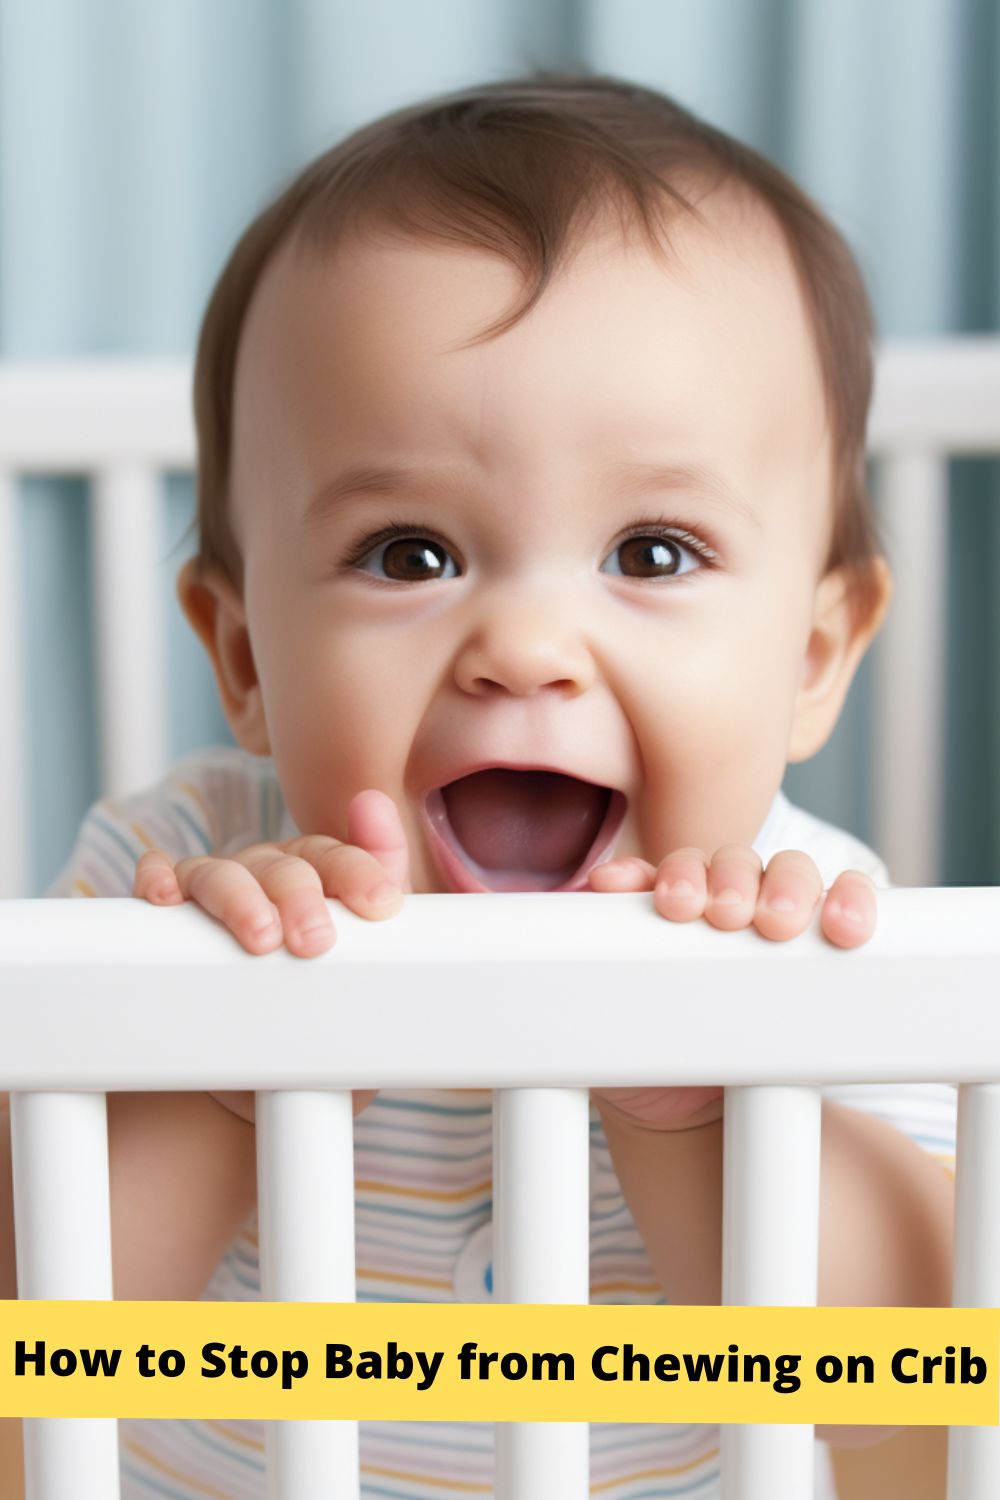 How to Stop Baby from Chewing on Crib